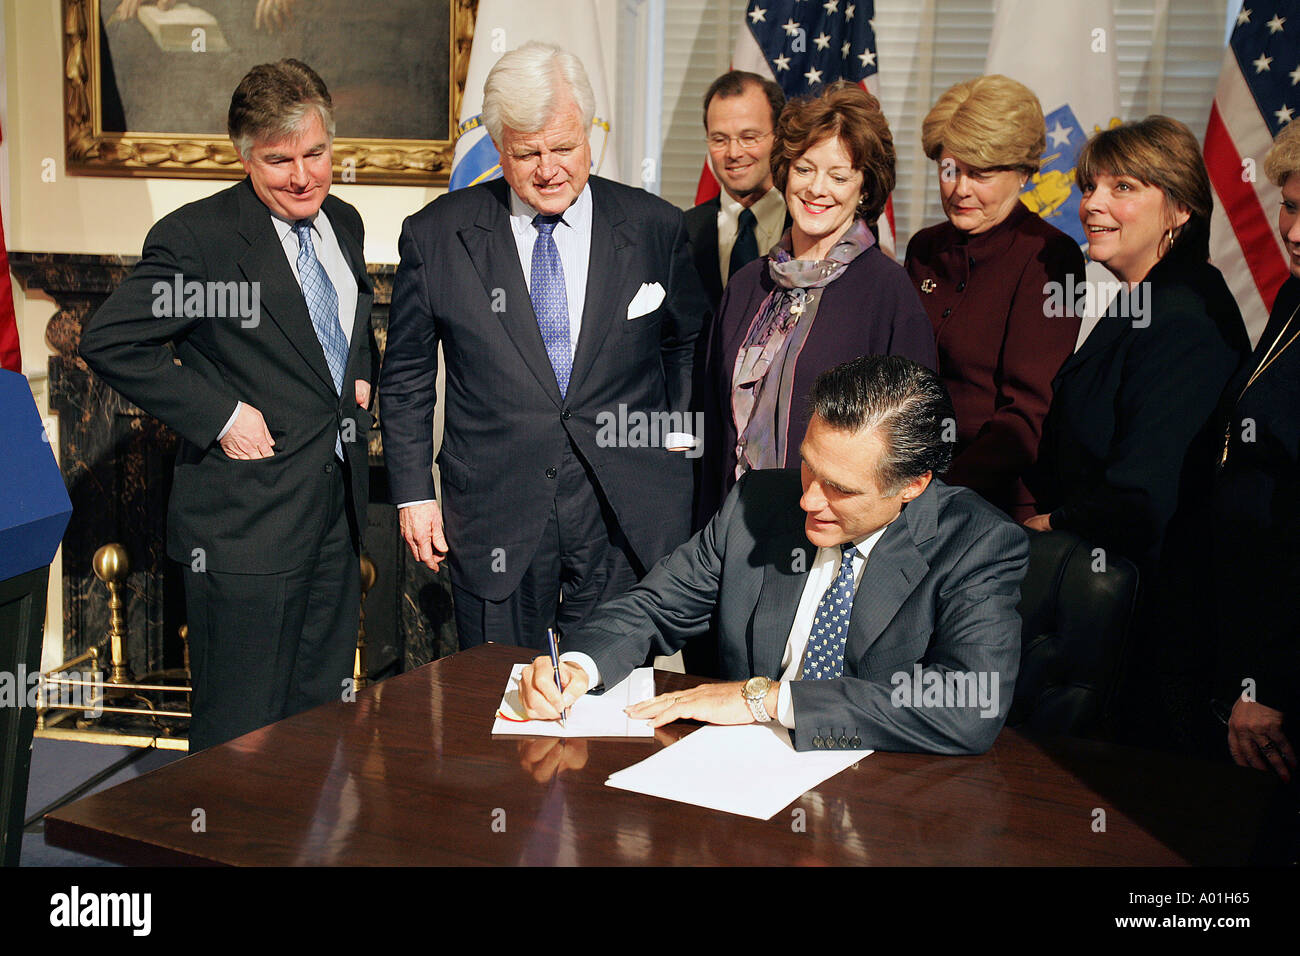 Senator Ted Kennedy watches as Governor Mitt Romney signs a bill into law Stock Photo